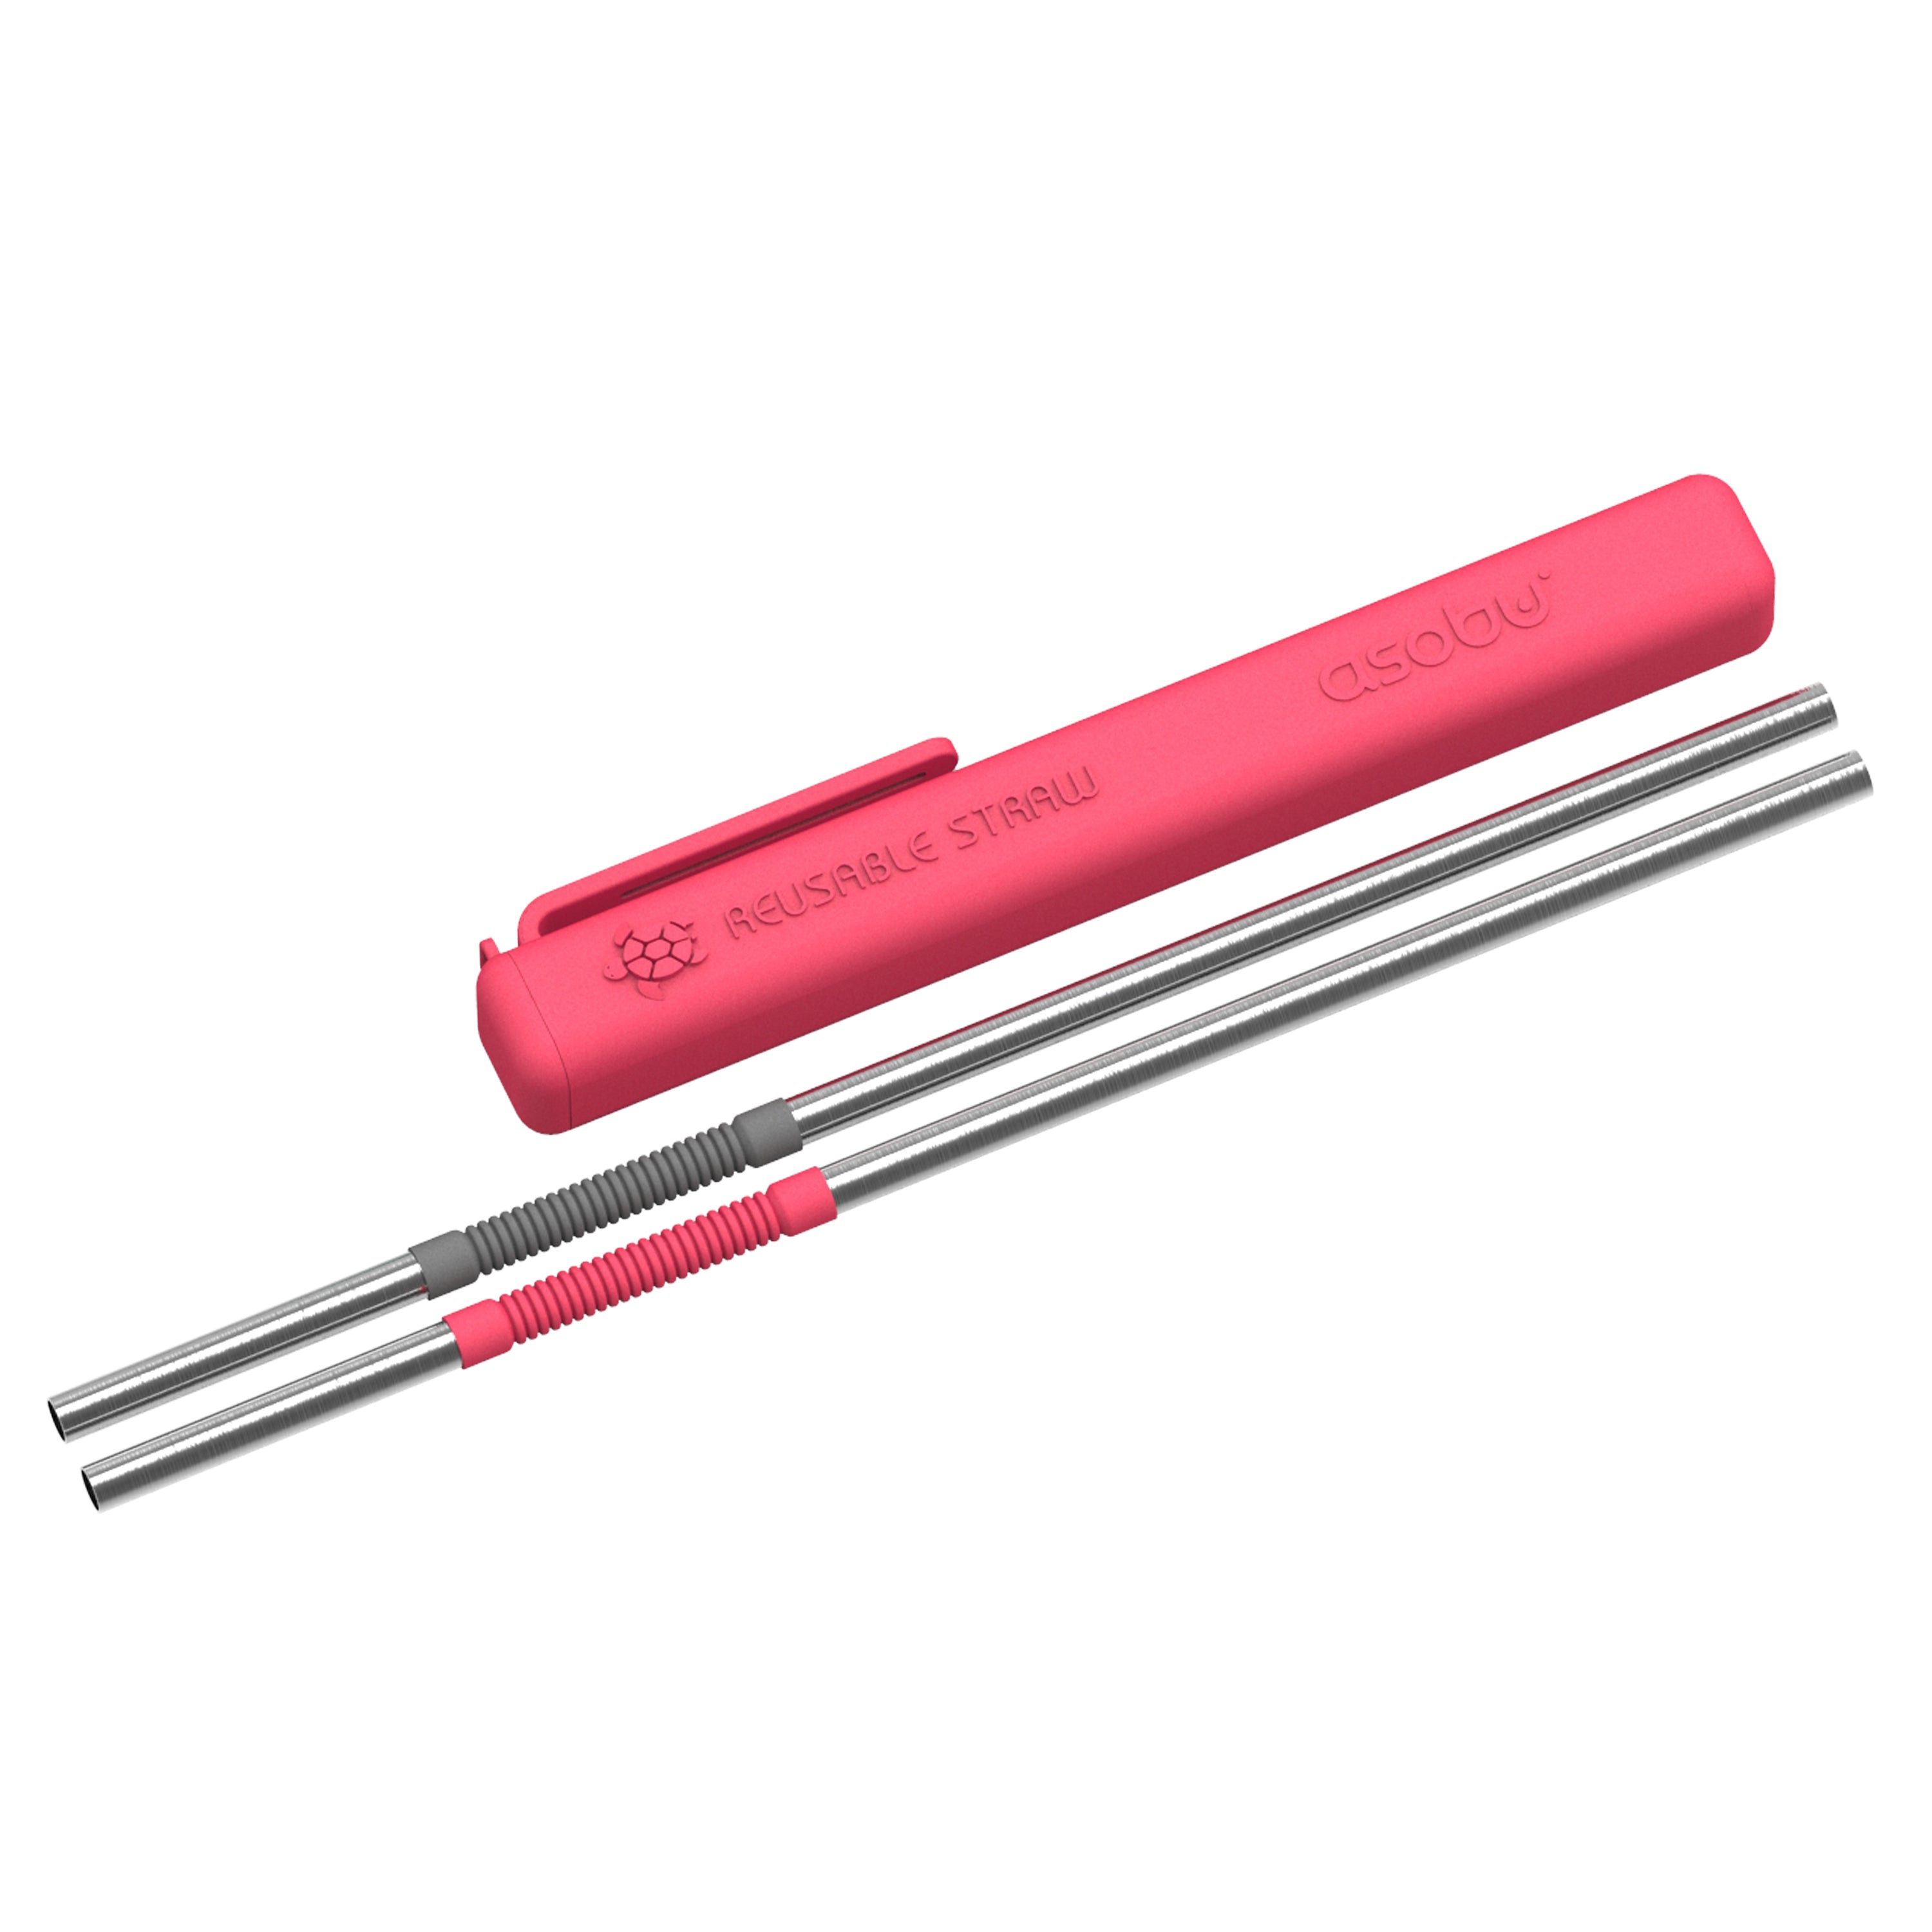 Re-usable Straws With Silicone Carry Holder